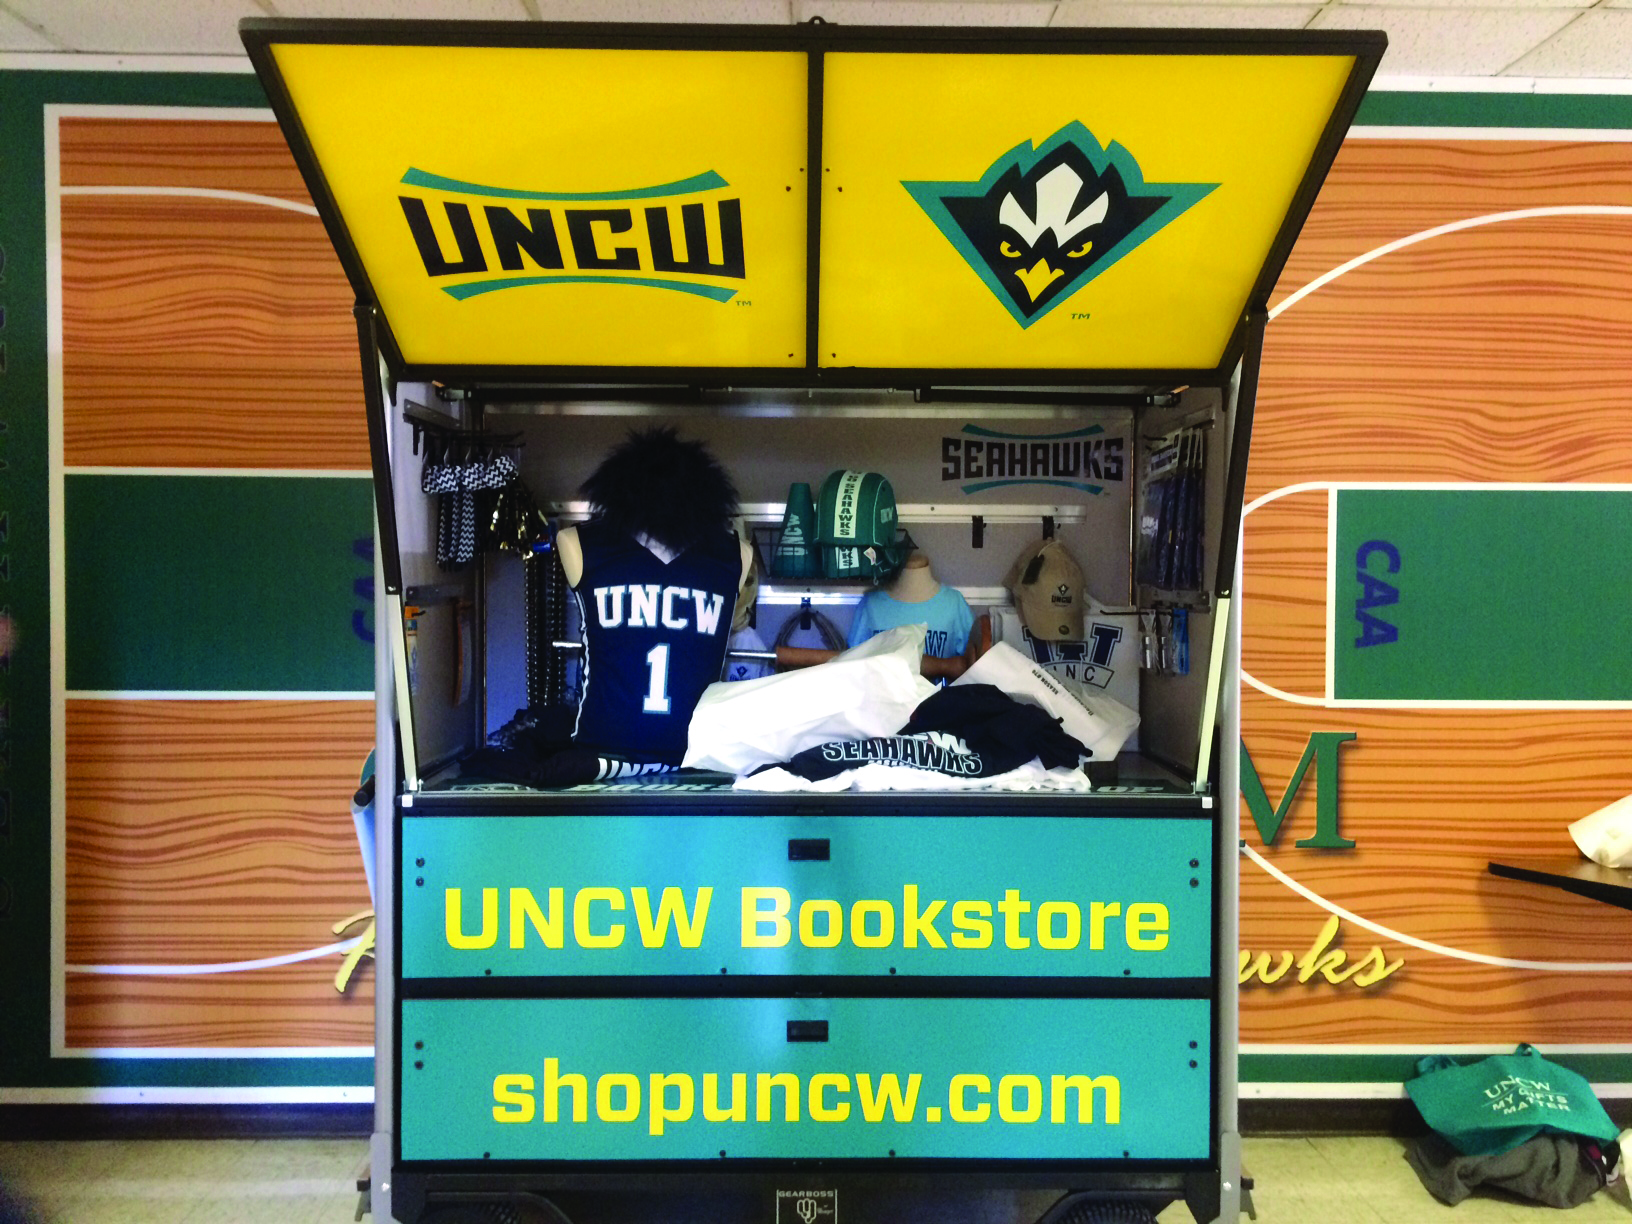 Printing Services used vinyl to spruce up this kiosk, which the athletics department uses to sell its merchandise.